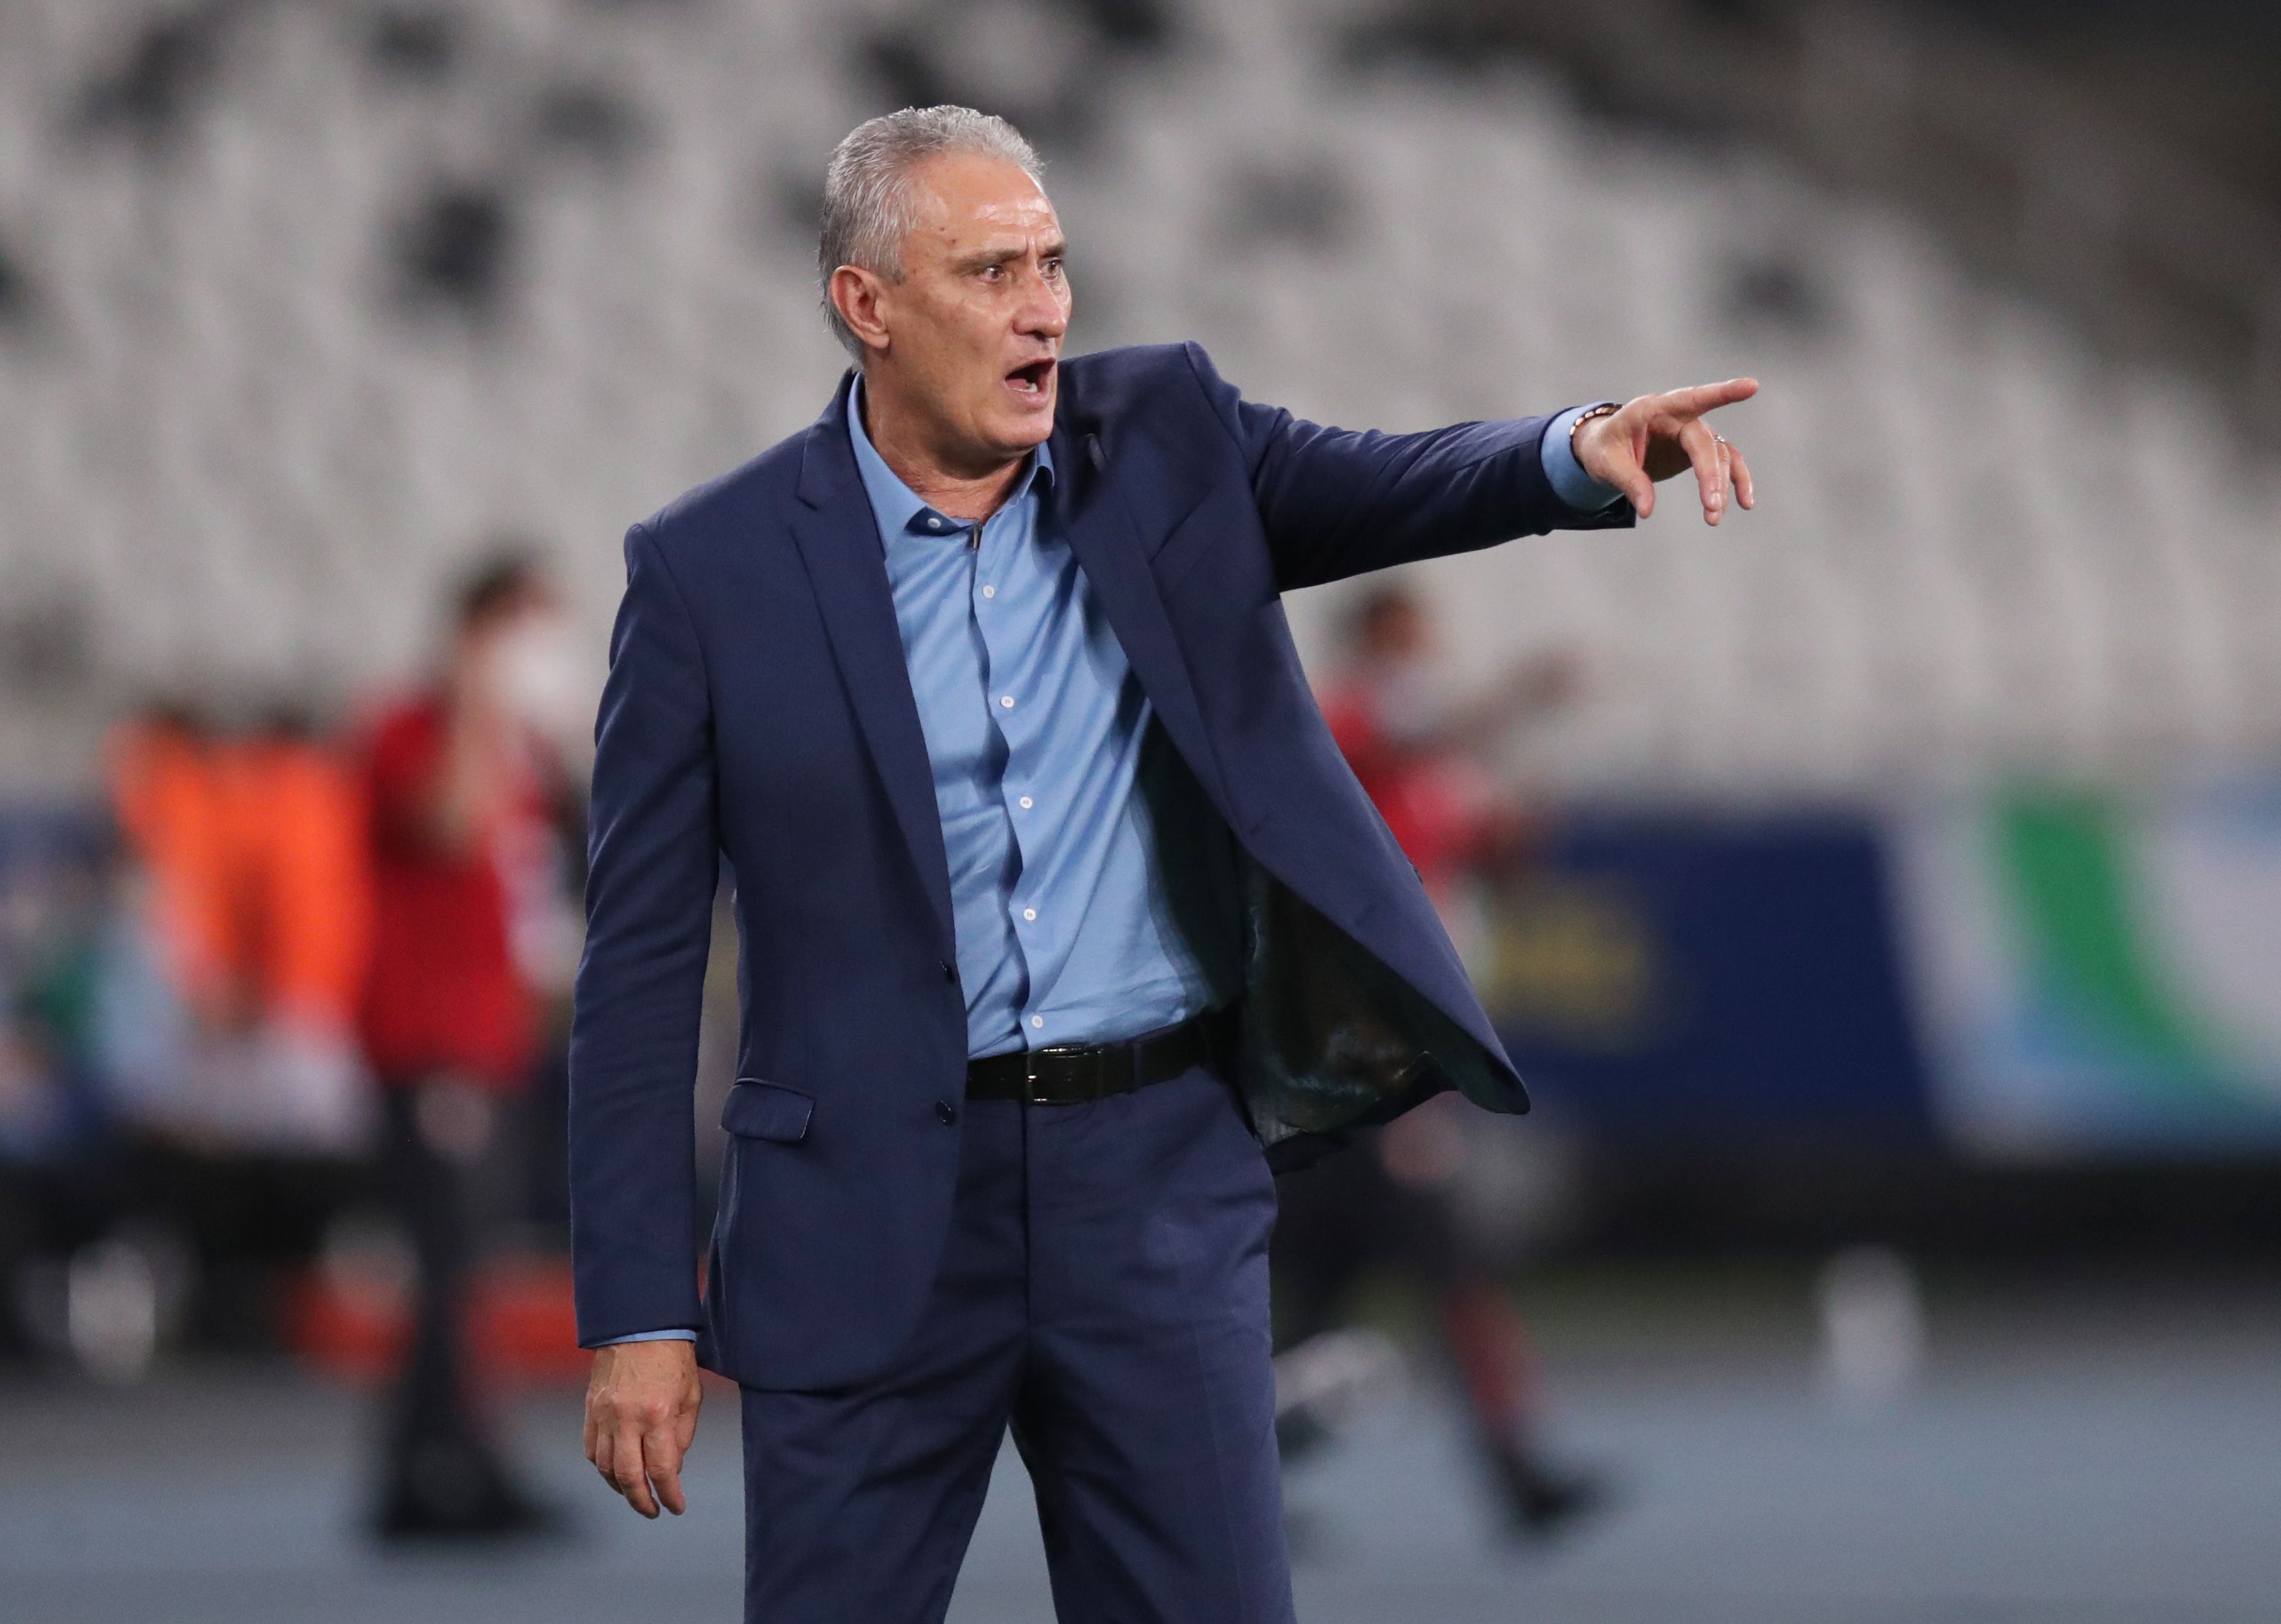 Argentina S Trophy Drought No Guide To Copa Final Says Tite Reuters